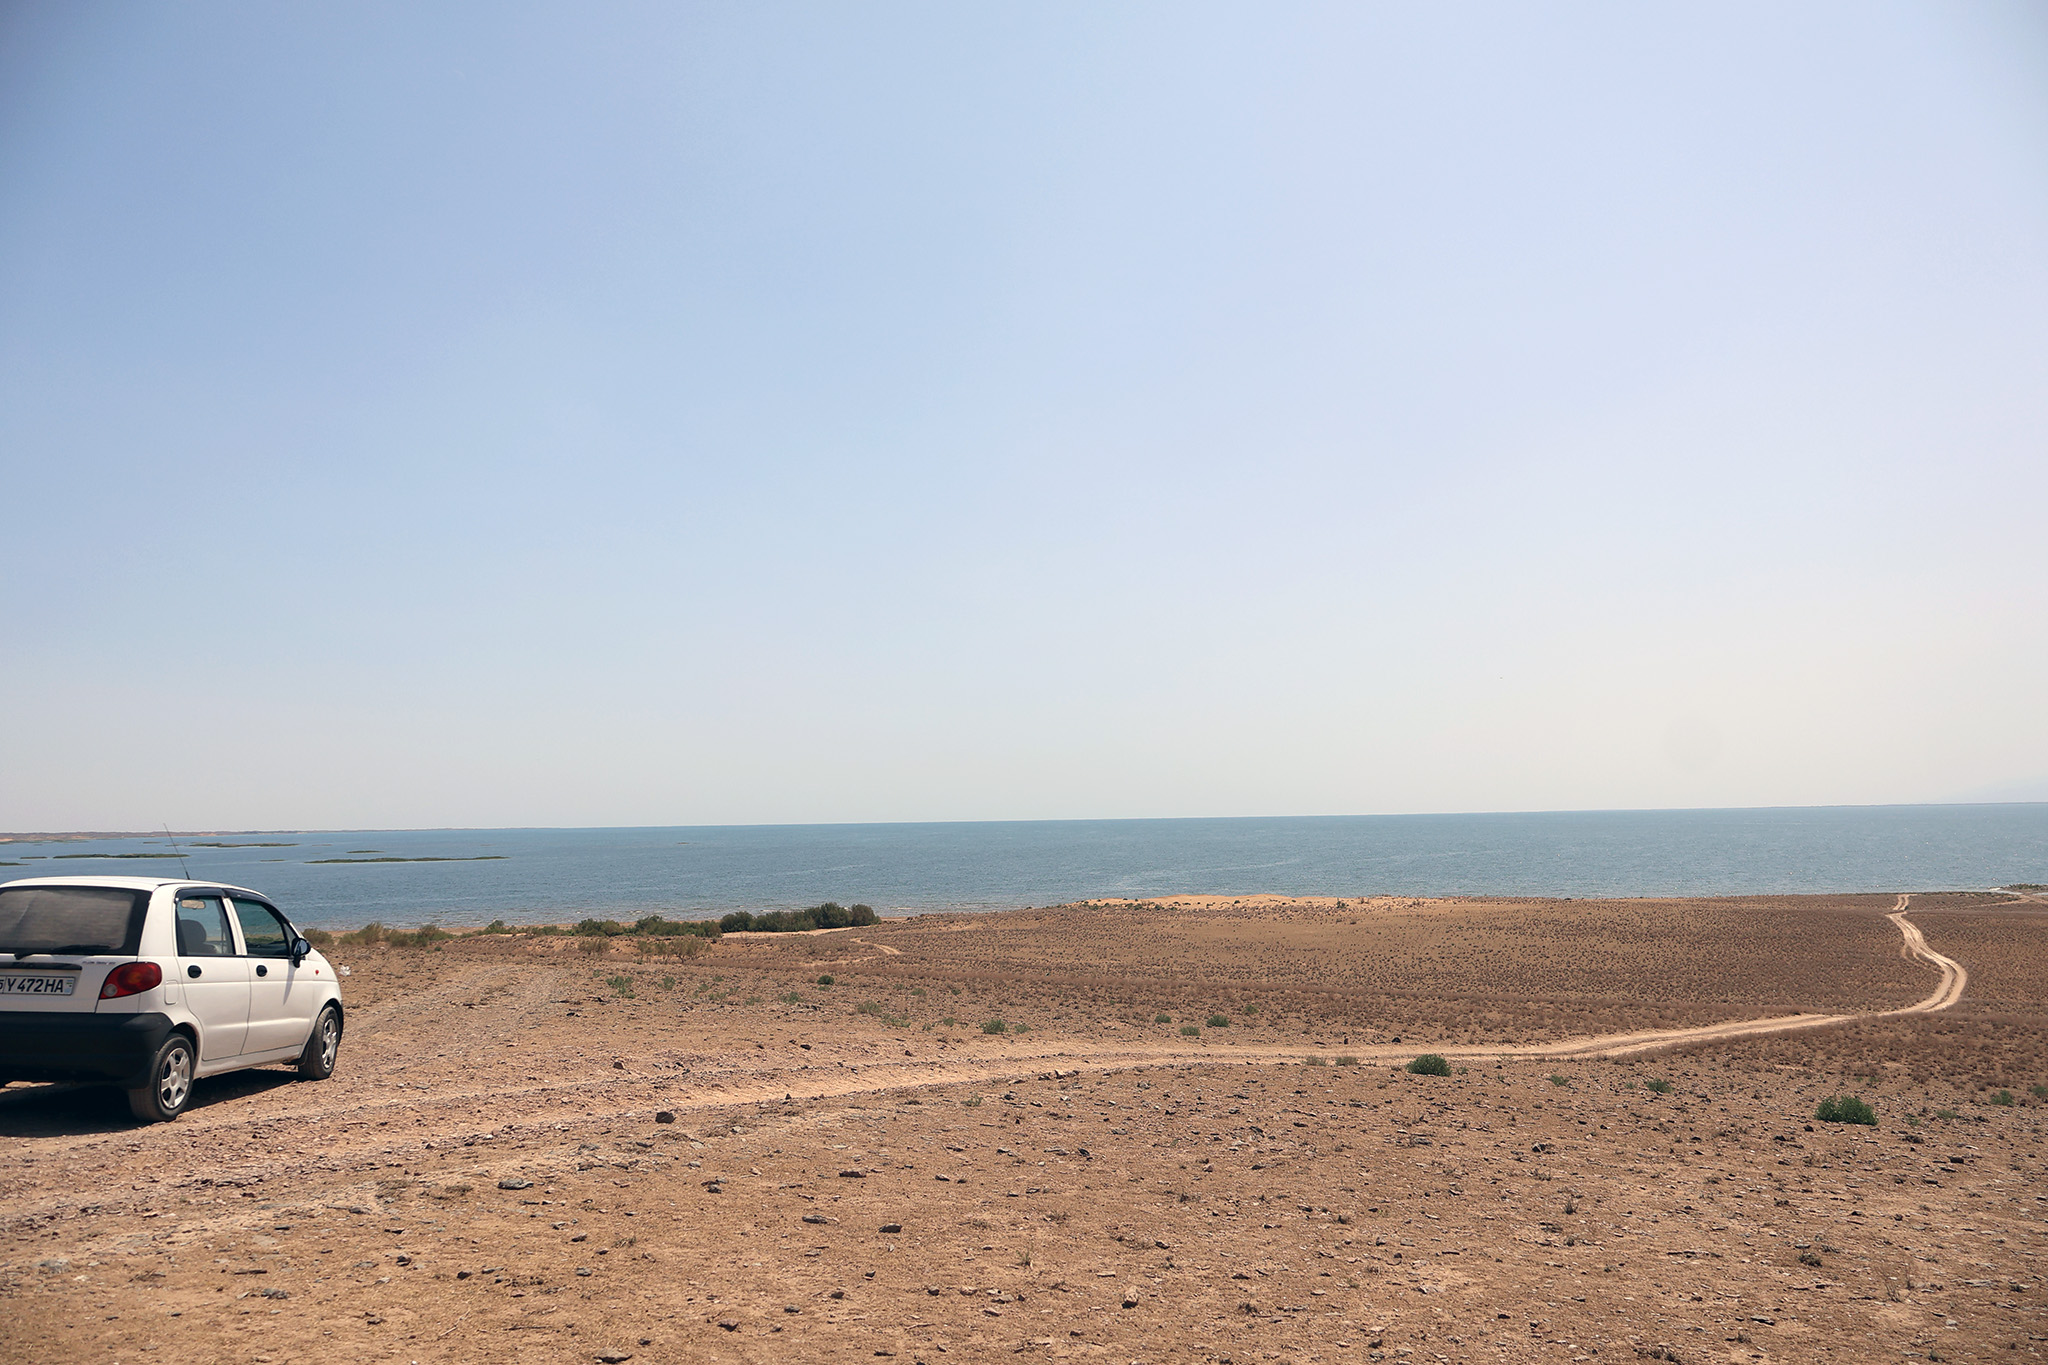 Nurata – Last Days with a Lake and a Desert